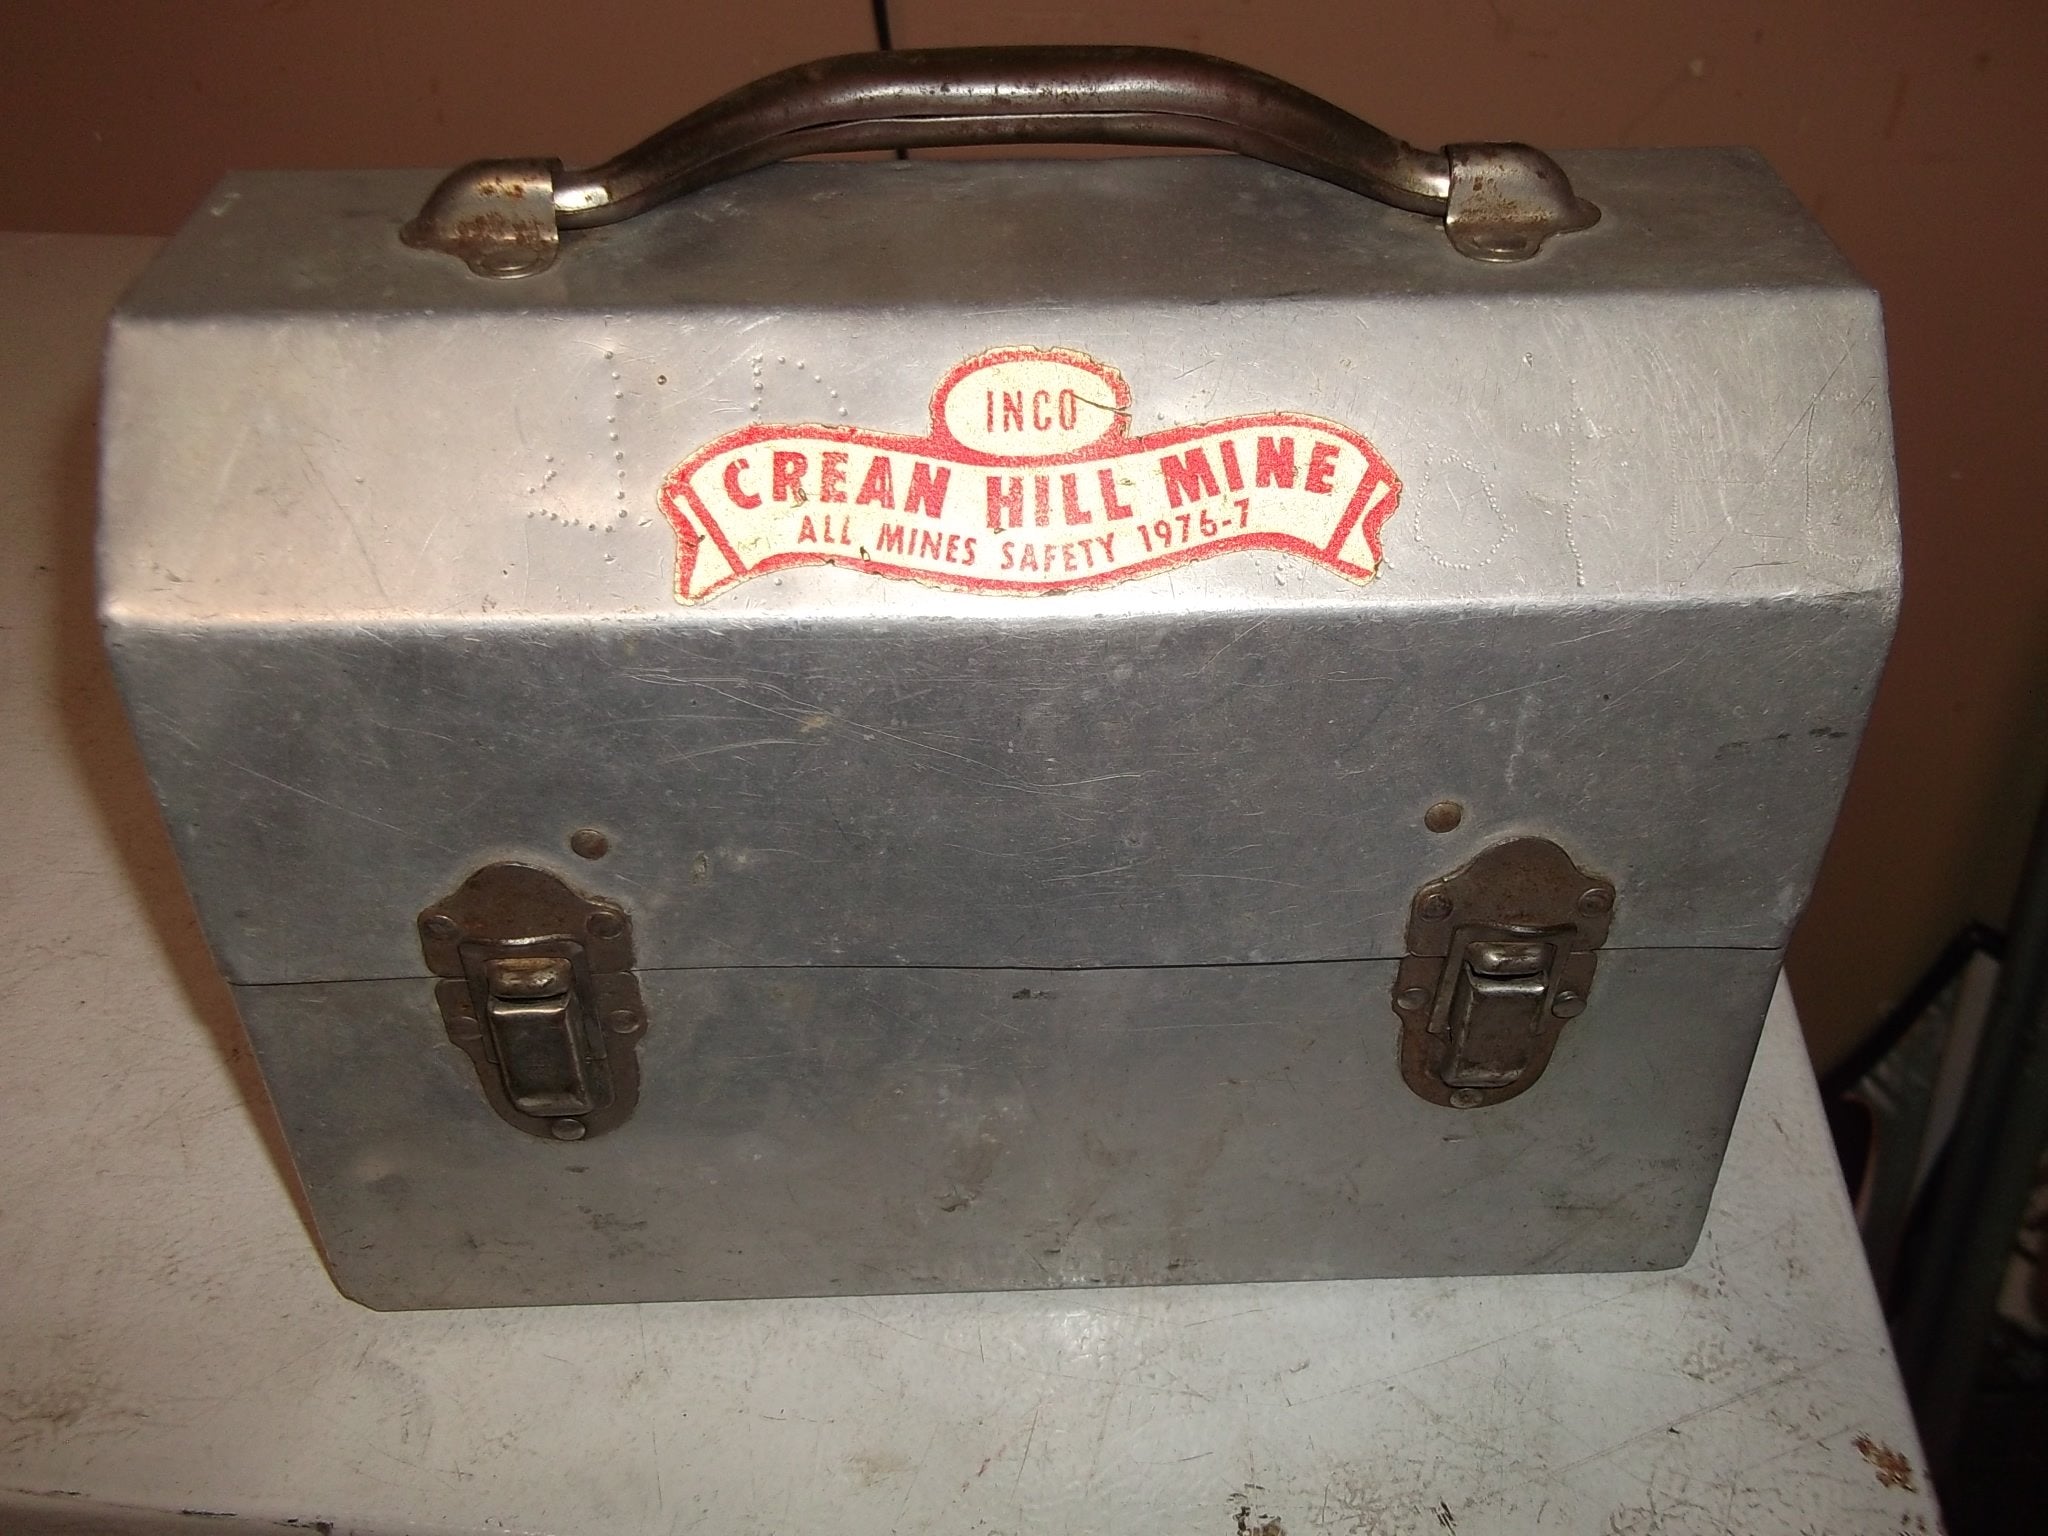 crean hill mine L. May vintage lunchbox container metal